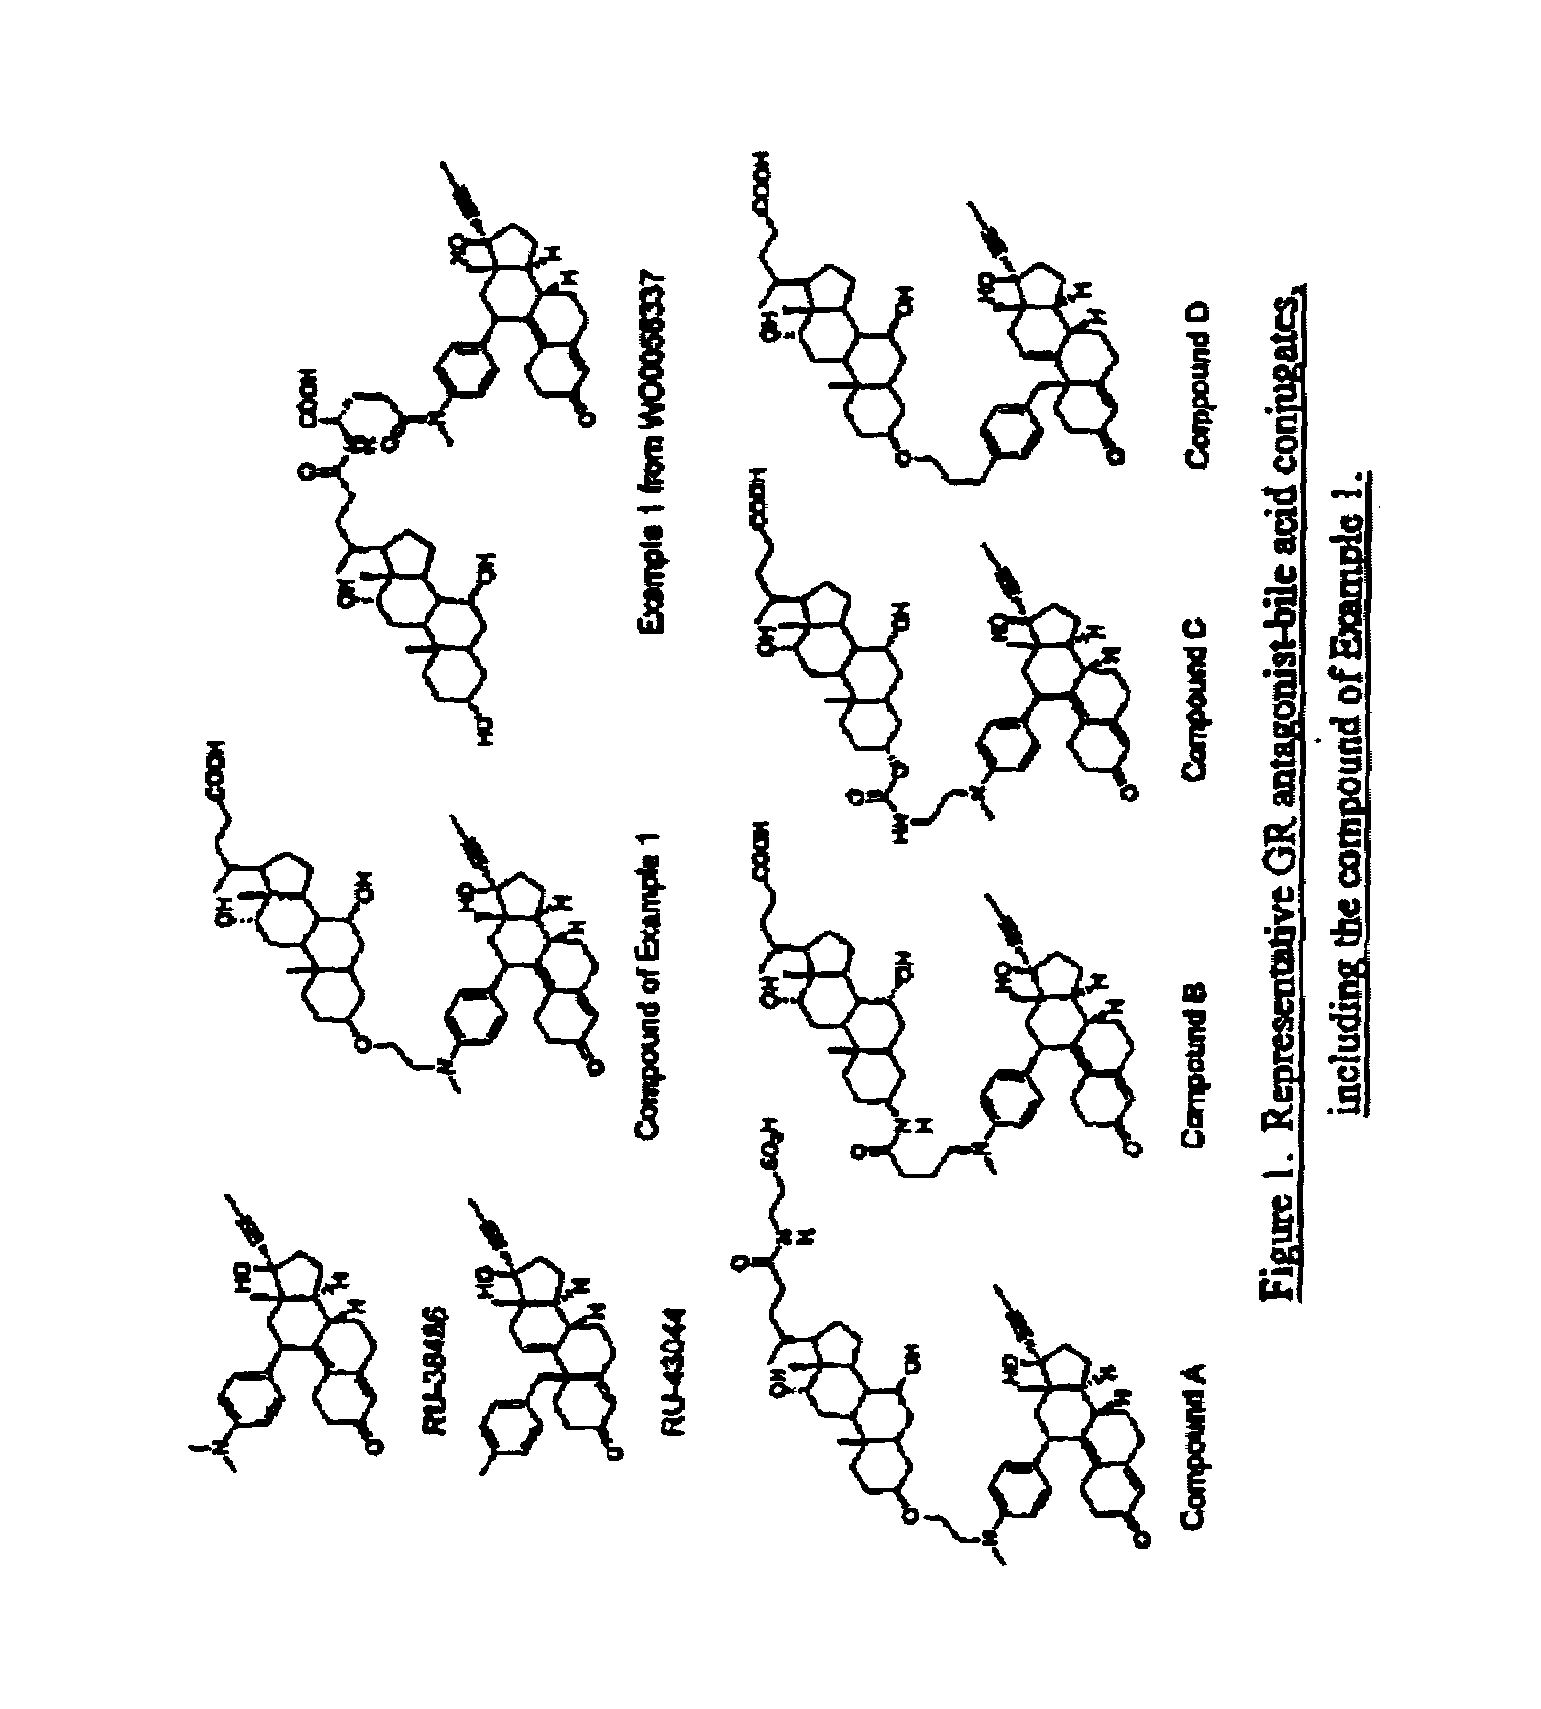 Glucocorticoid receptor ligands for the treatment of metabolic disorders